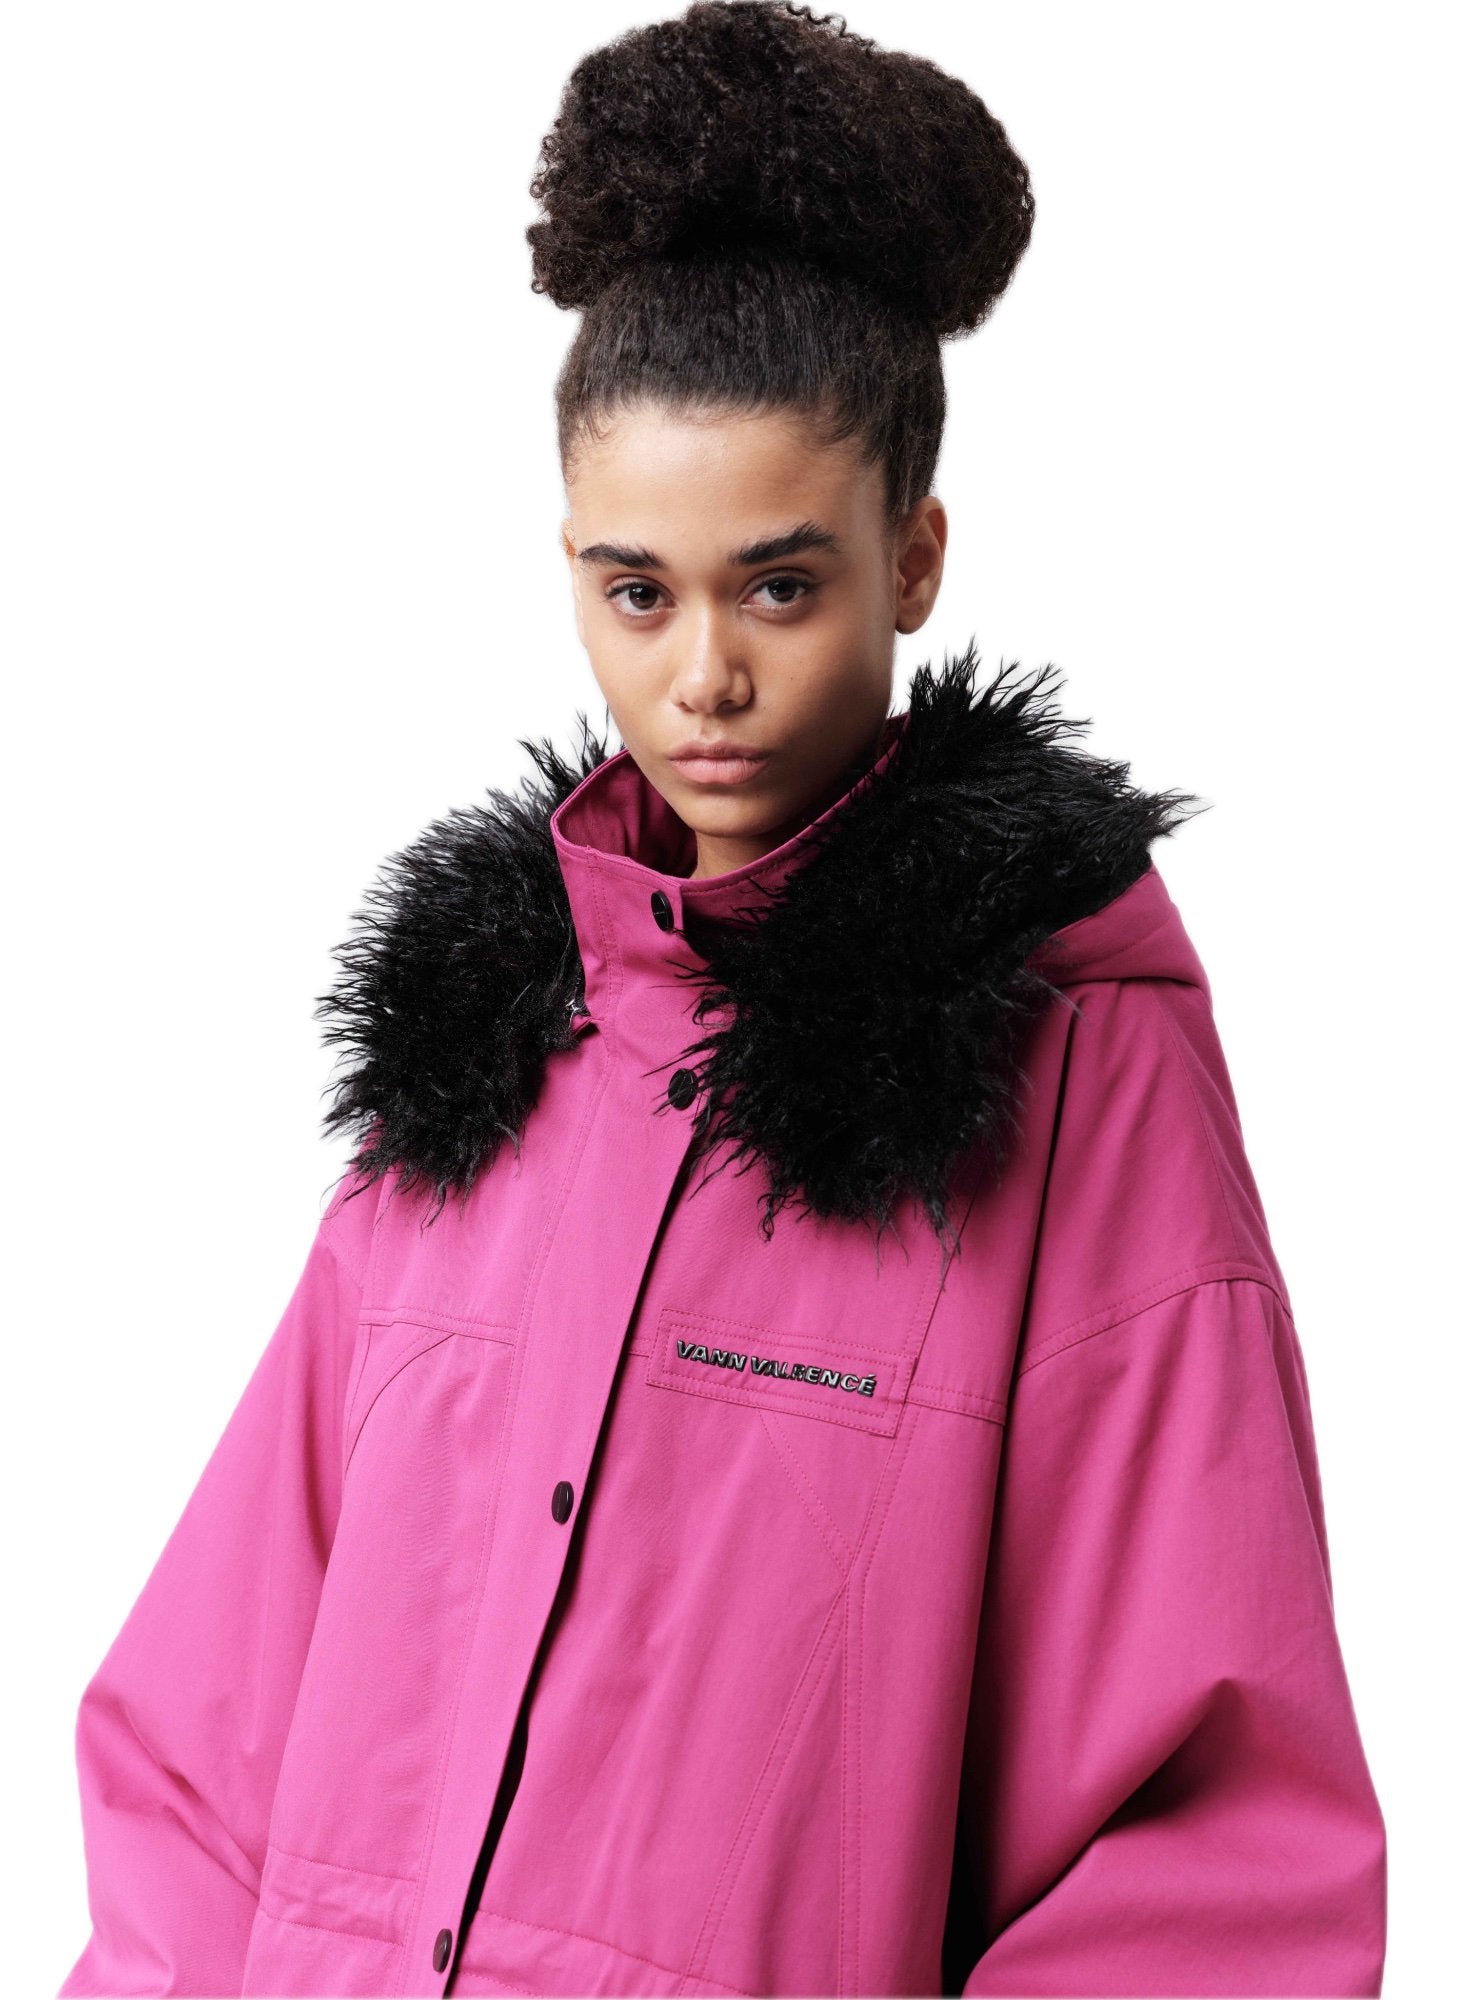 VANN VALRENCÉ Berry Purple Loose Fit Feather Jacket Coat | MADA IN CHINA